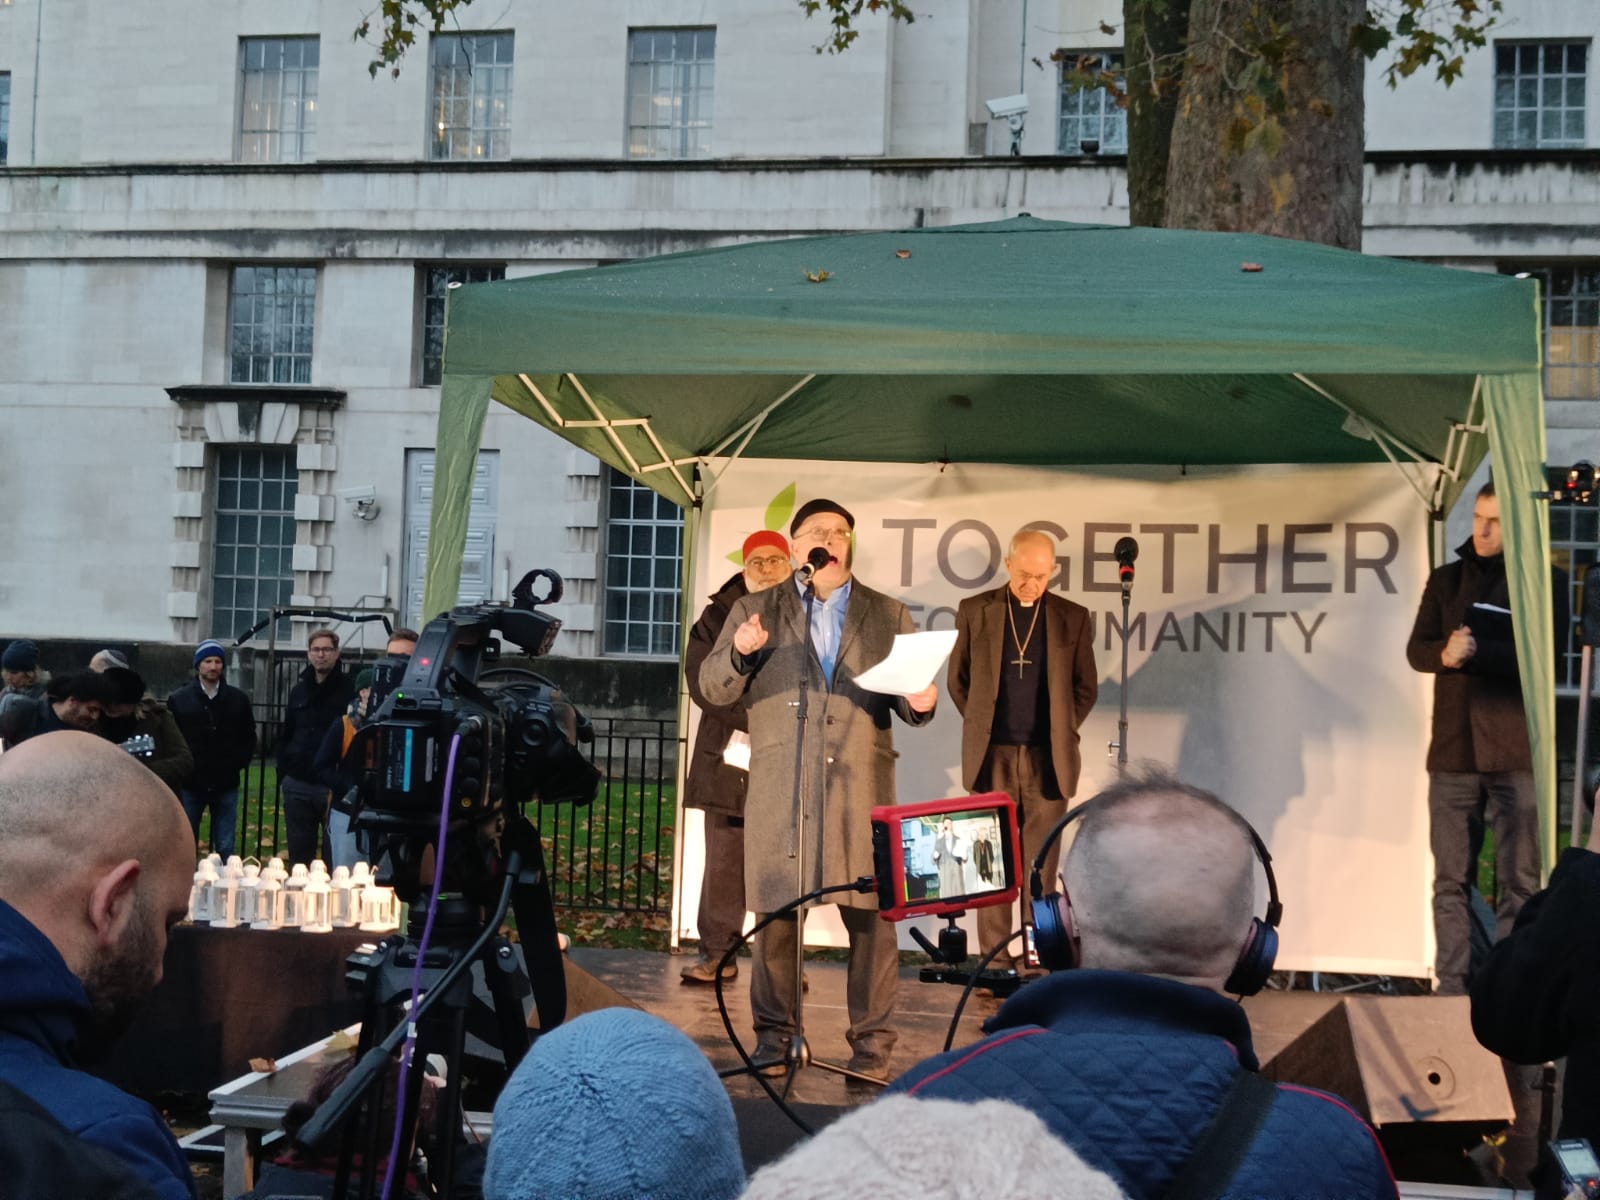 HIAS+JCORE join call against hate at #Together4Humanity vigil